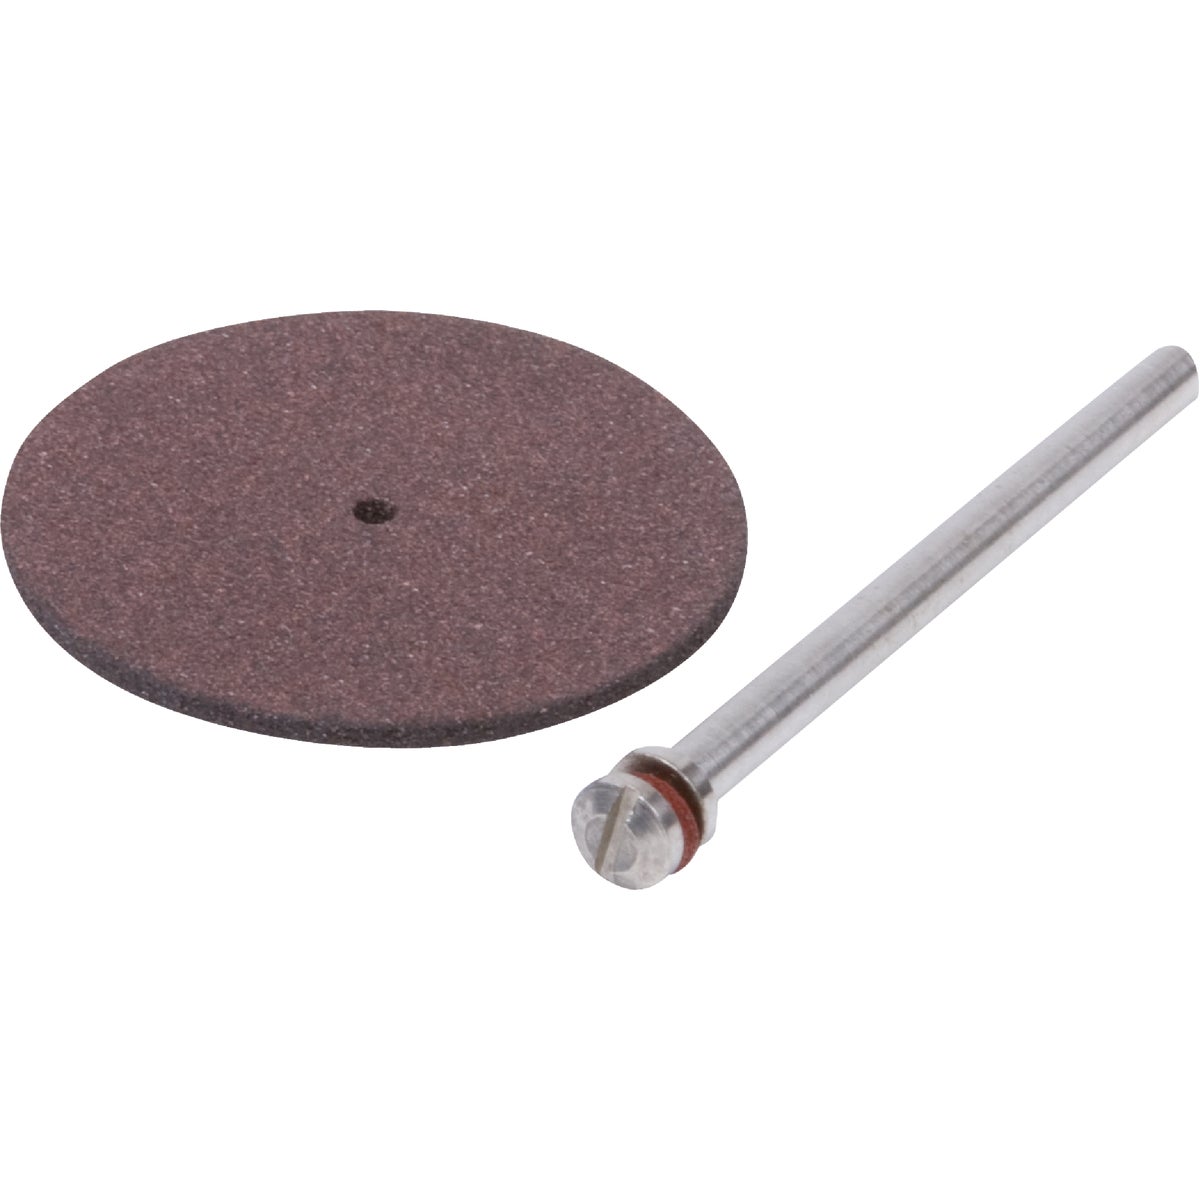 Item 300812, Includes 1 fiberglass reinforced wheel for cutting all types of metal and (